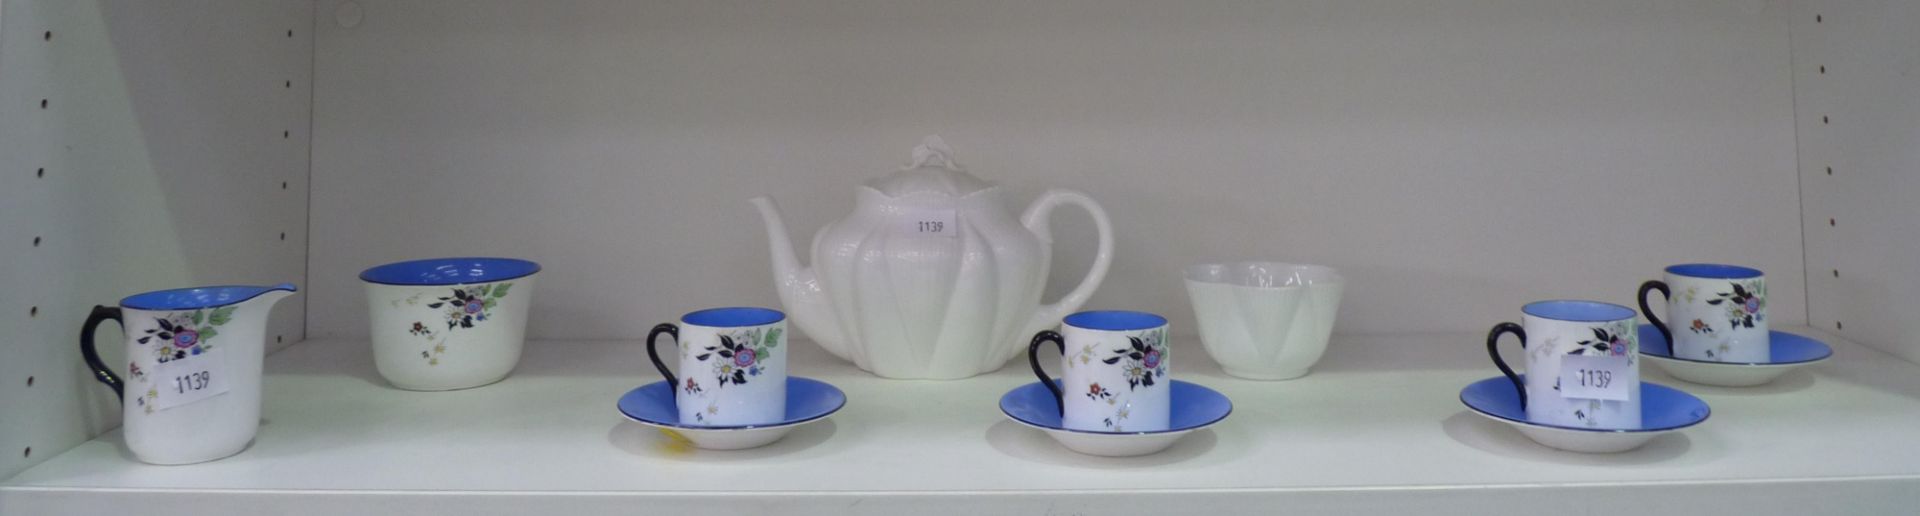 A Shelley 'Dainty' teapot & sugar bowl, together with a 1930s Shelley part coffee service (est £